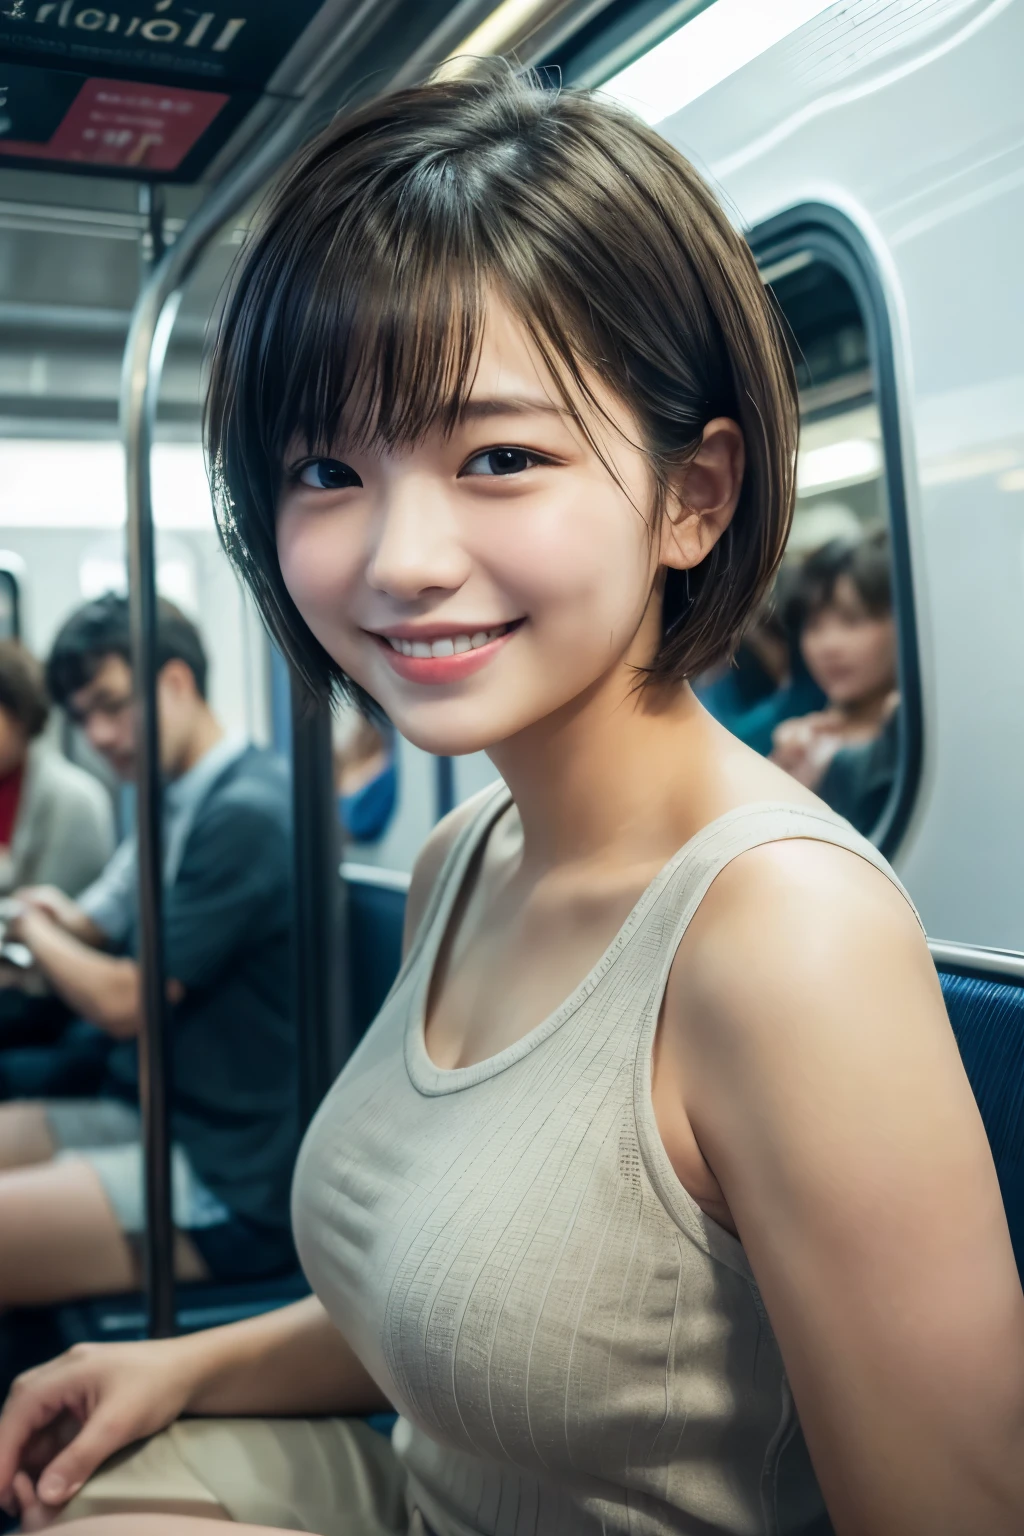 highest quality, masterpiece, Ultra-high resolution, (Reality: 1.4), Original photo, One woman, mature, happy smile, short hair, plump body, , Cinema Lighting, from below, High school girl on a crowded train